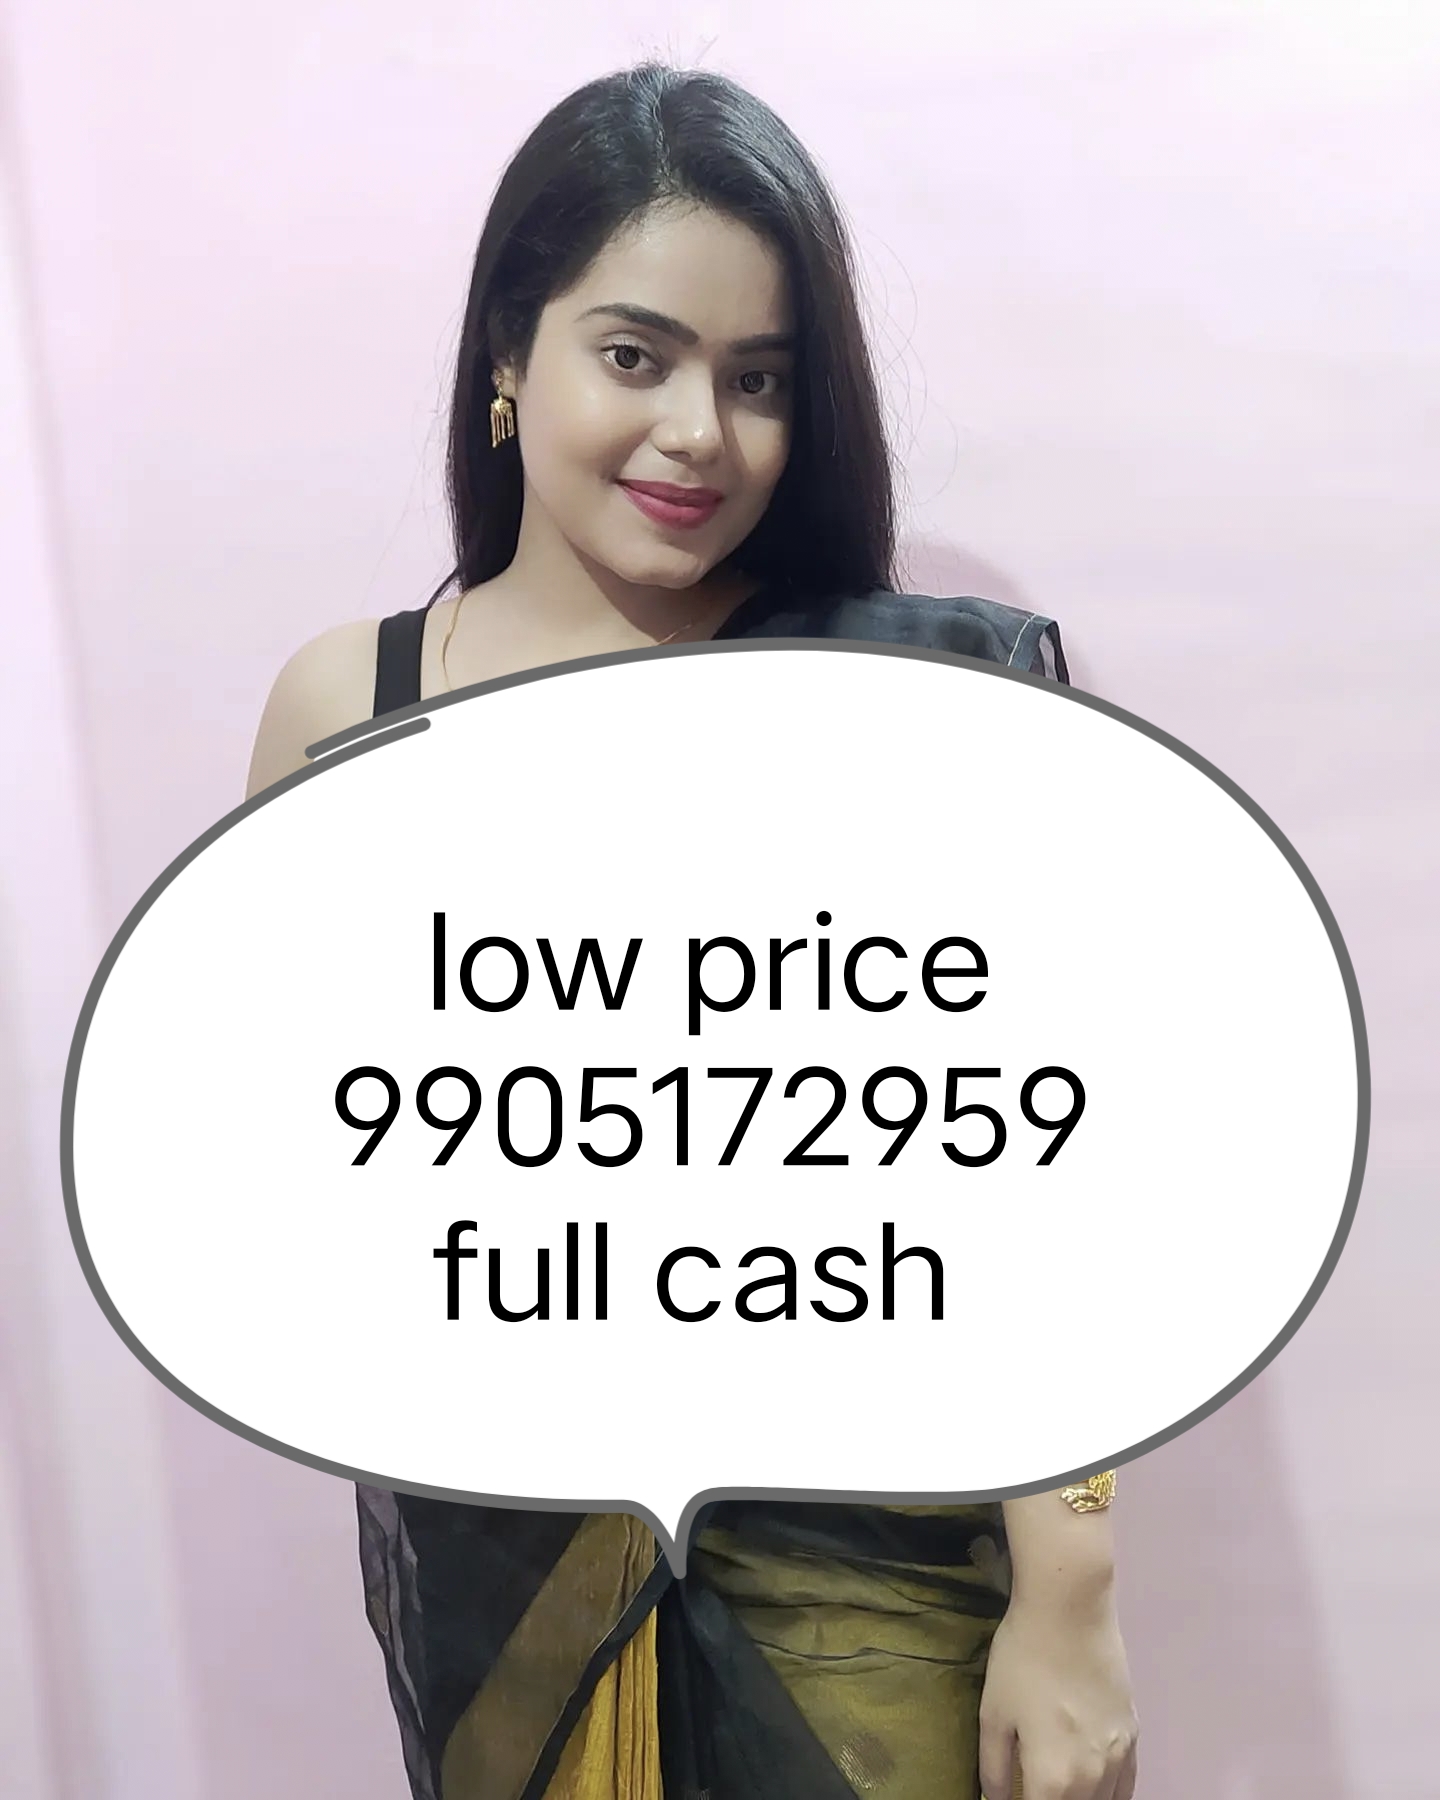 Kukatpally all Hyderabad service low price full cash ....